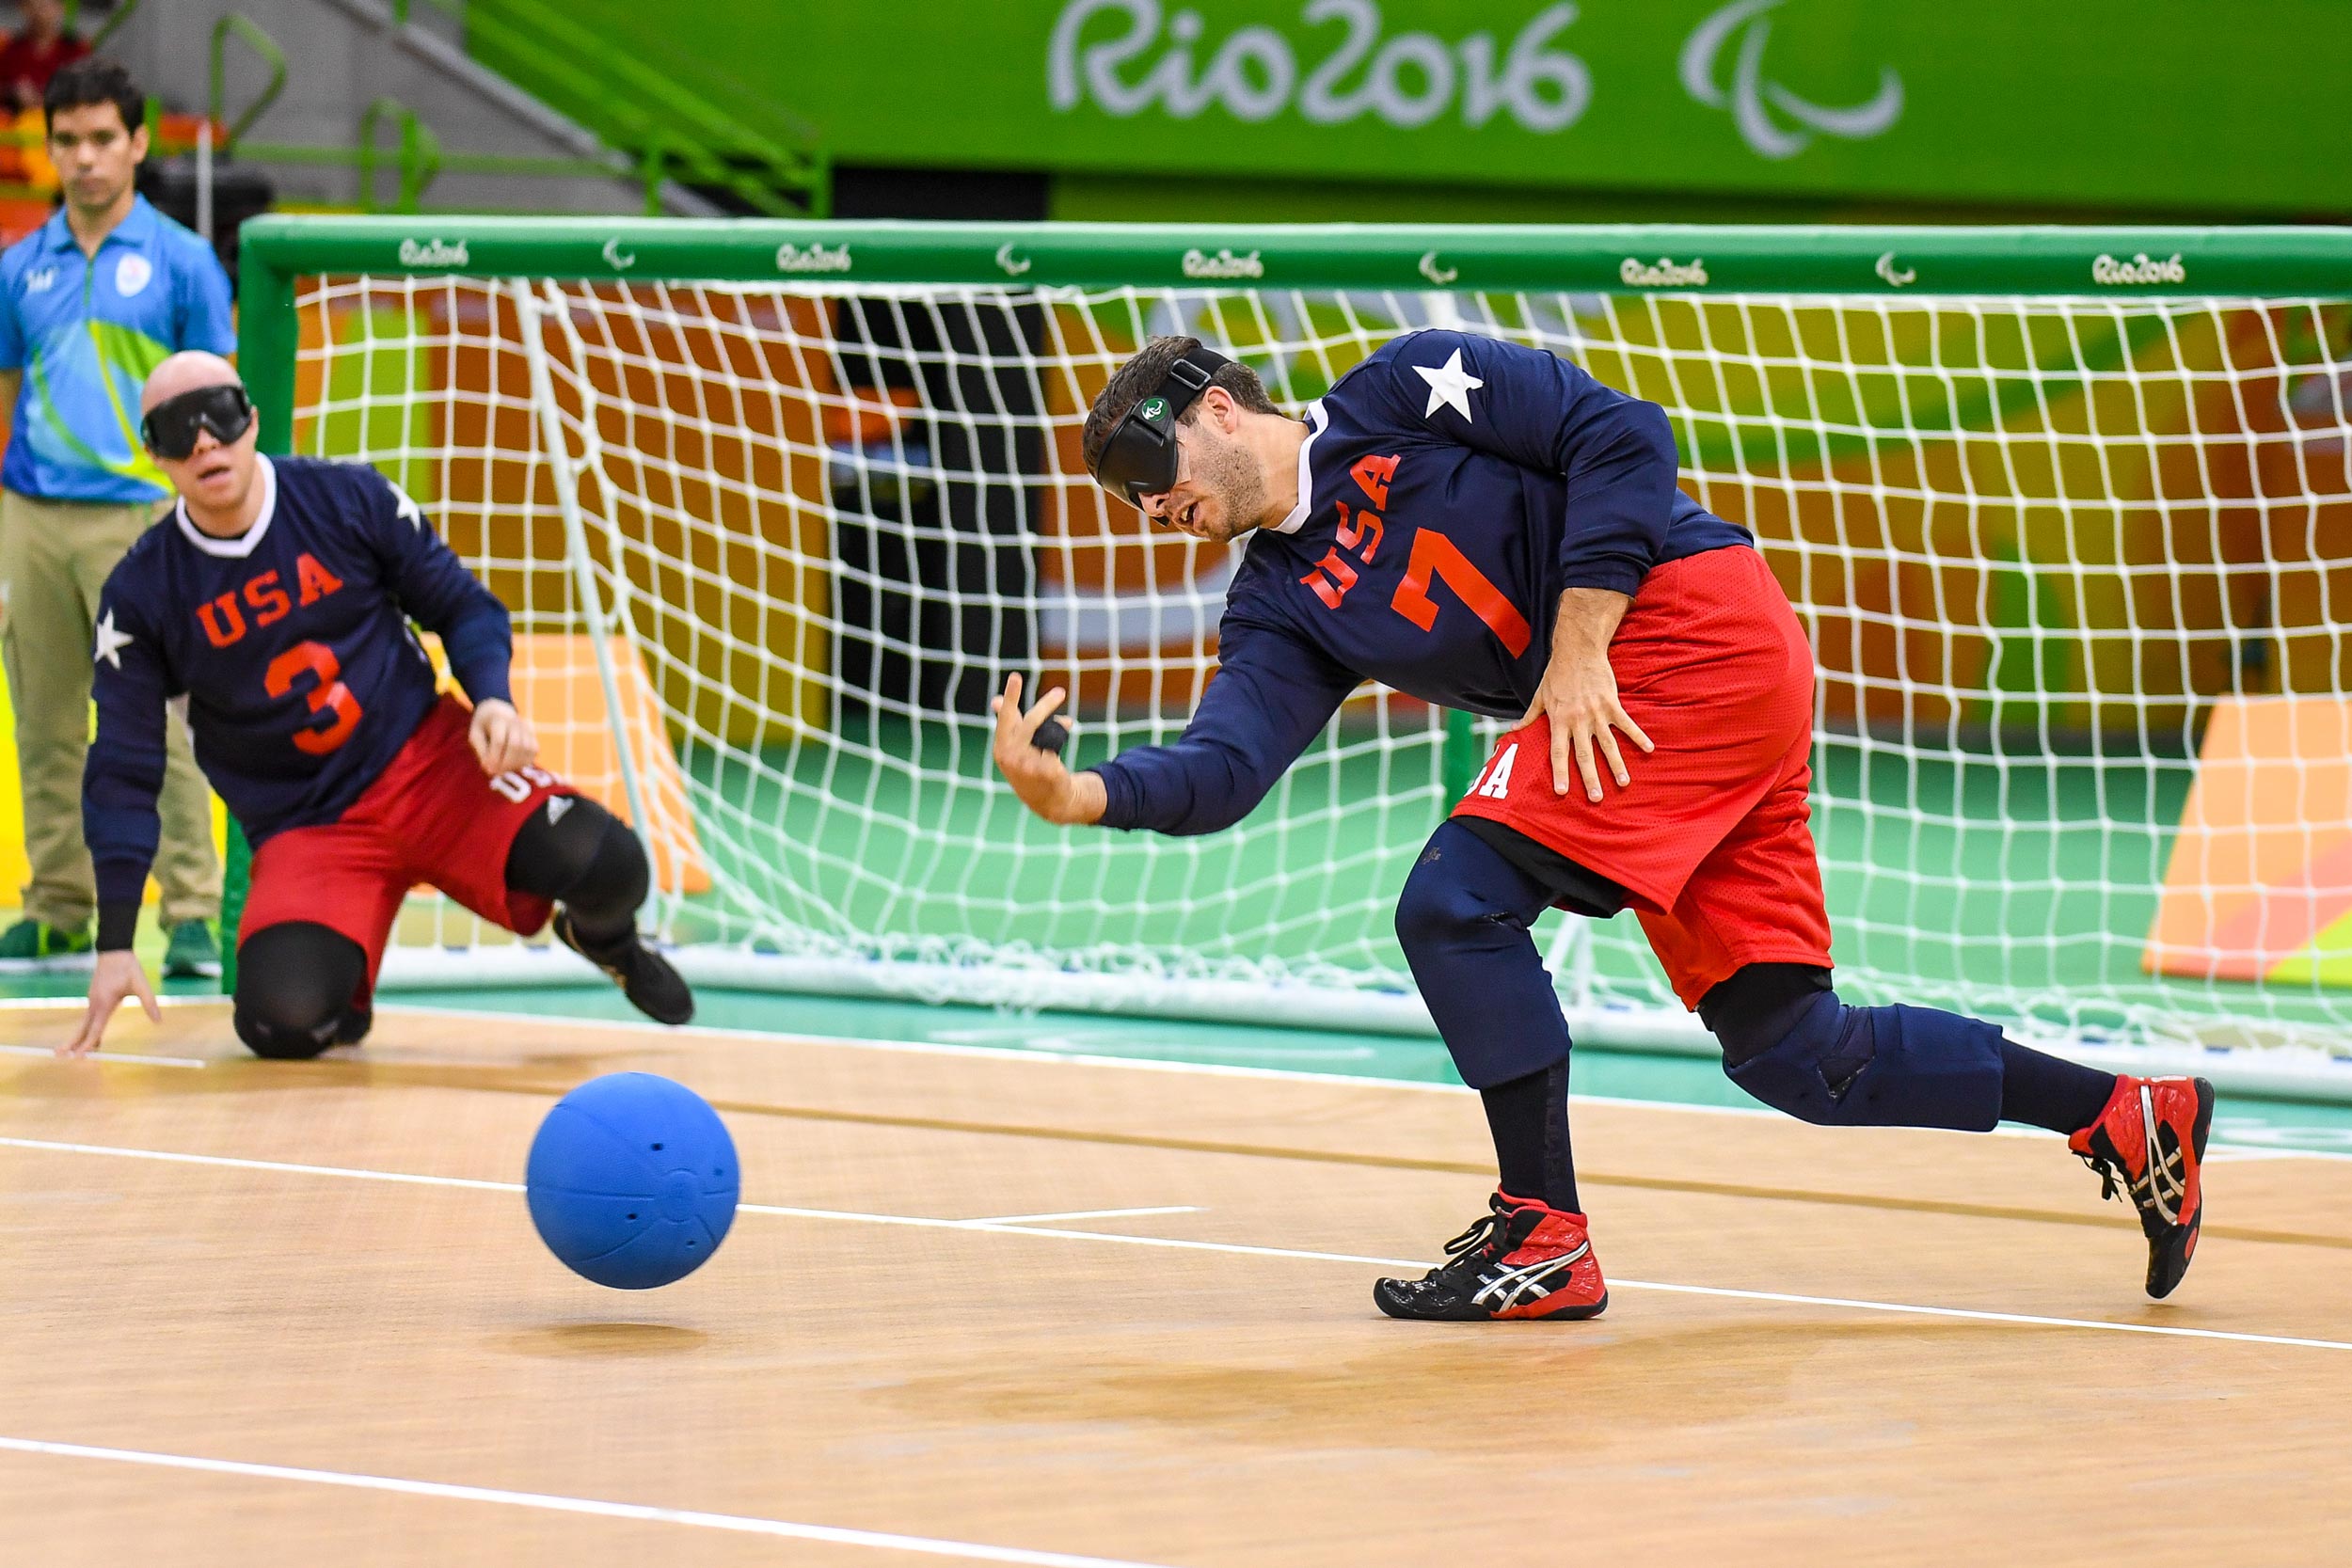 Matt Simpson rolling the goalball back into play during the 2016 Olympic games